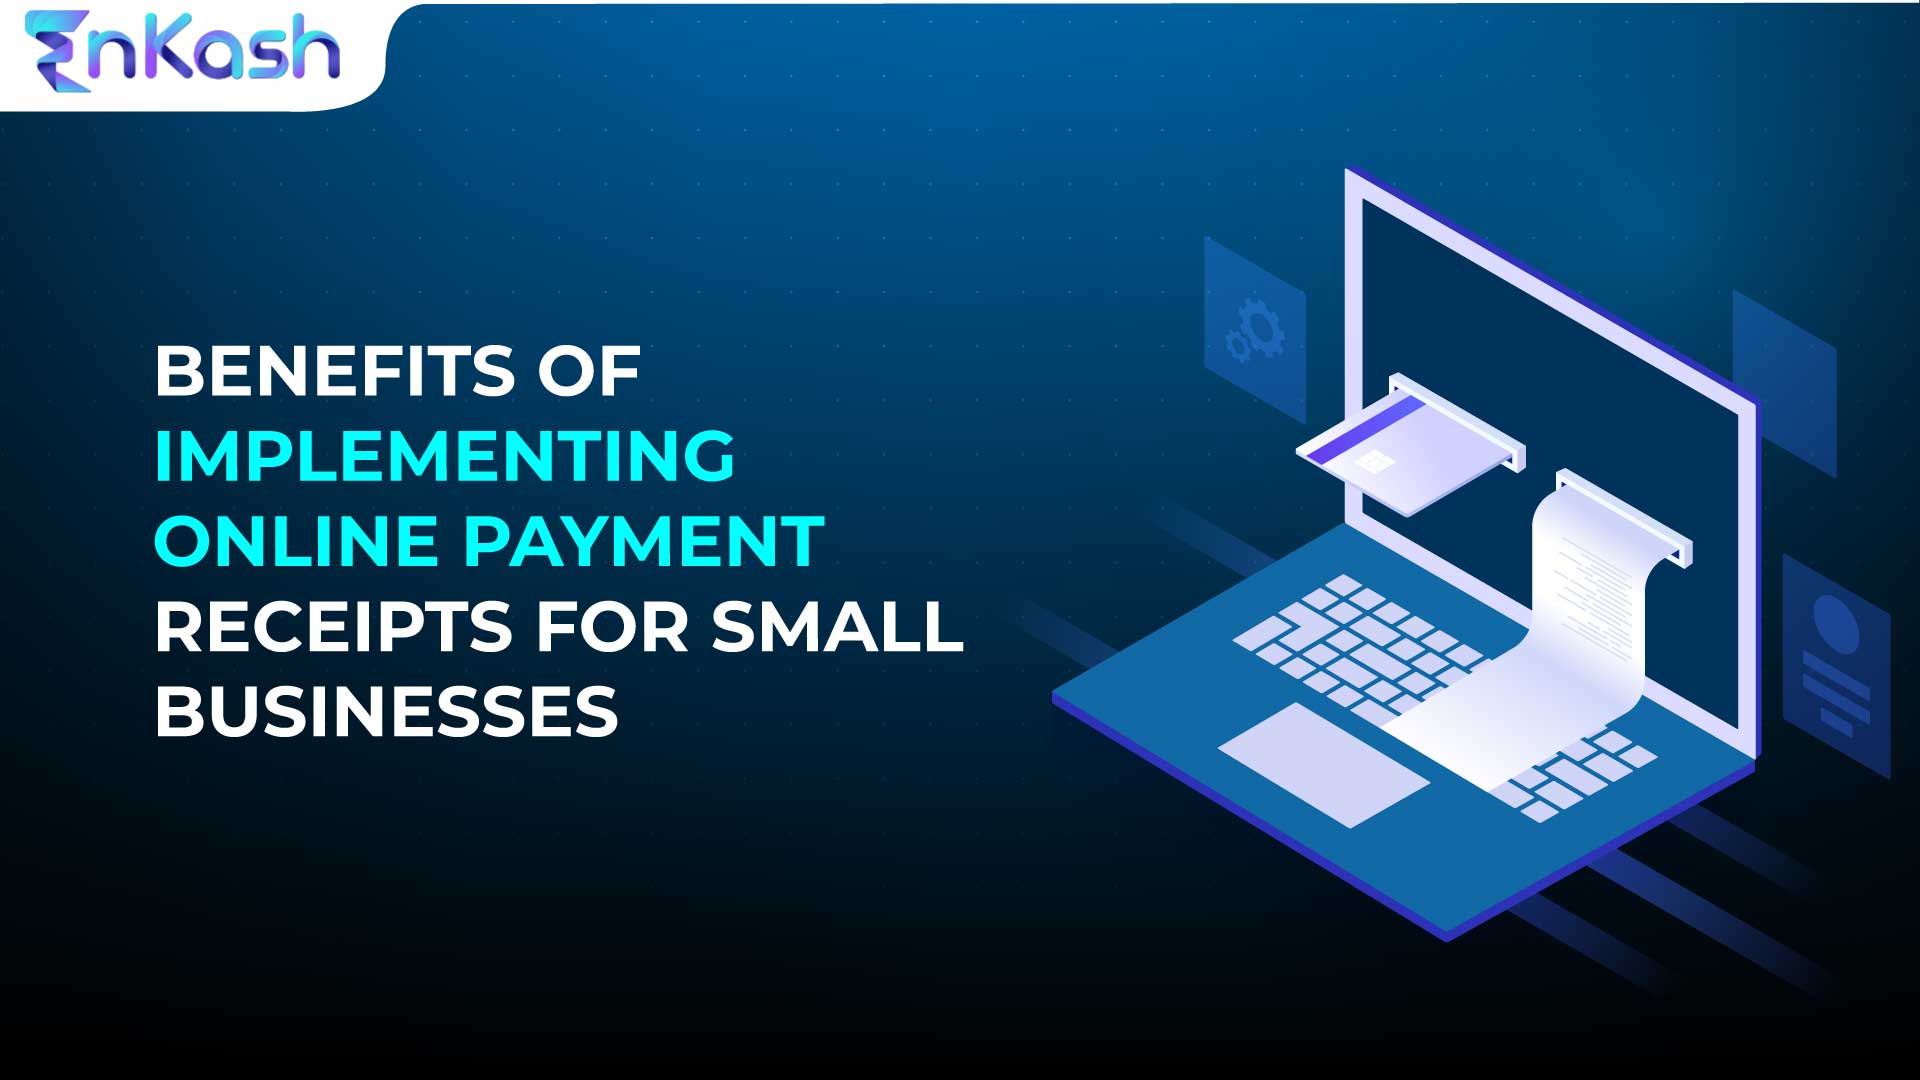 Benefits of implementing online payment receipts for small businesses